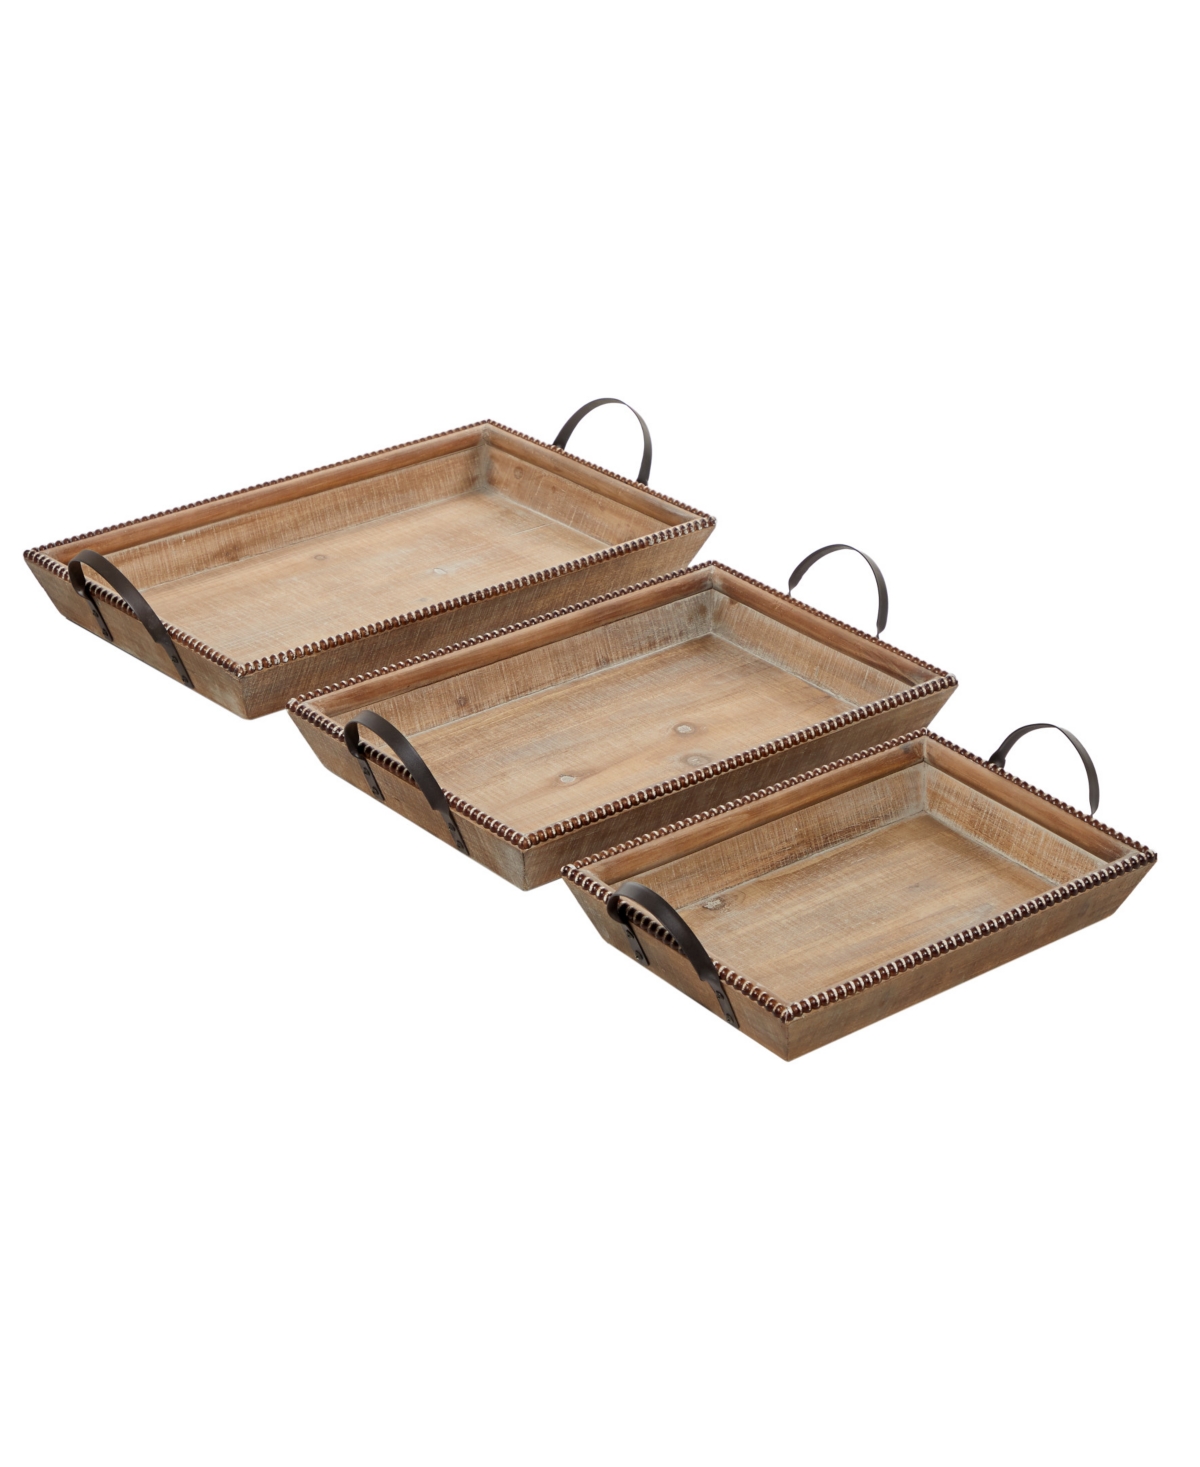 Rosemary Lane Wood Tray With Metal Handles, Set Of 3, 20", 24", 27" W In Brown